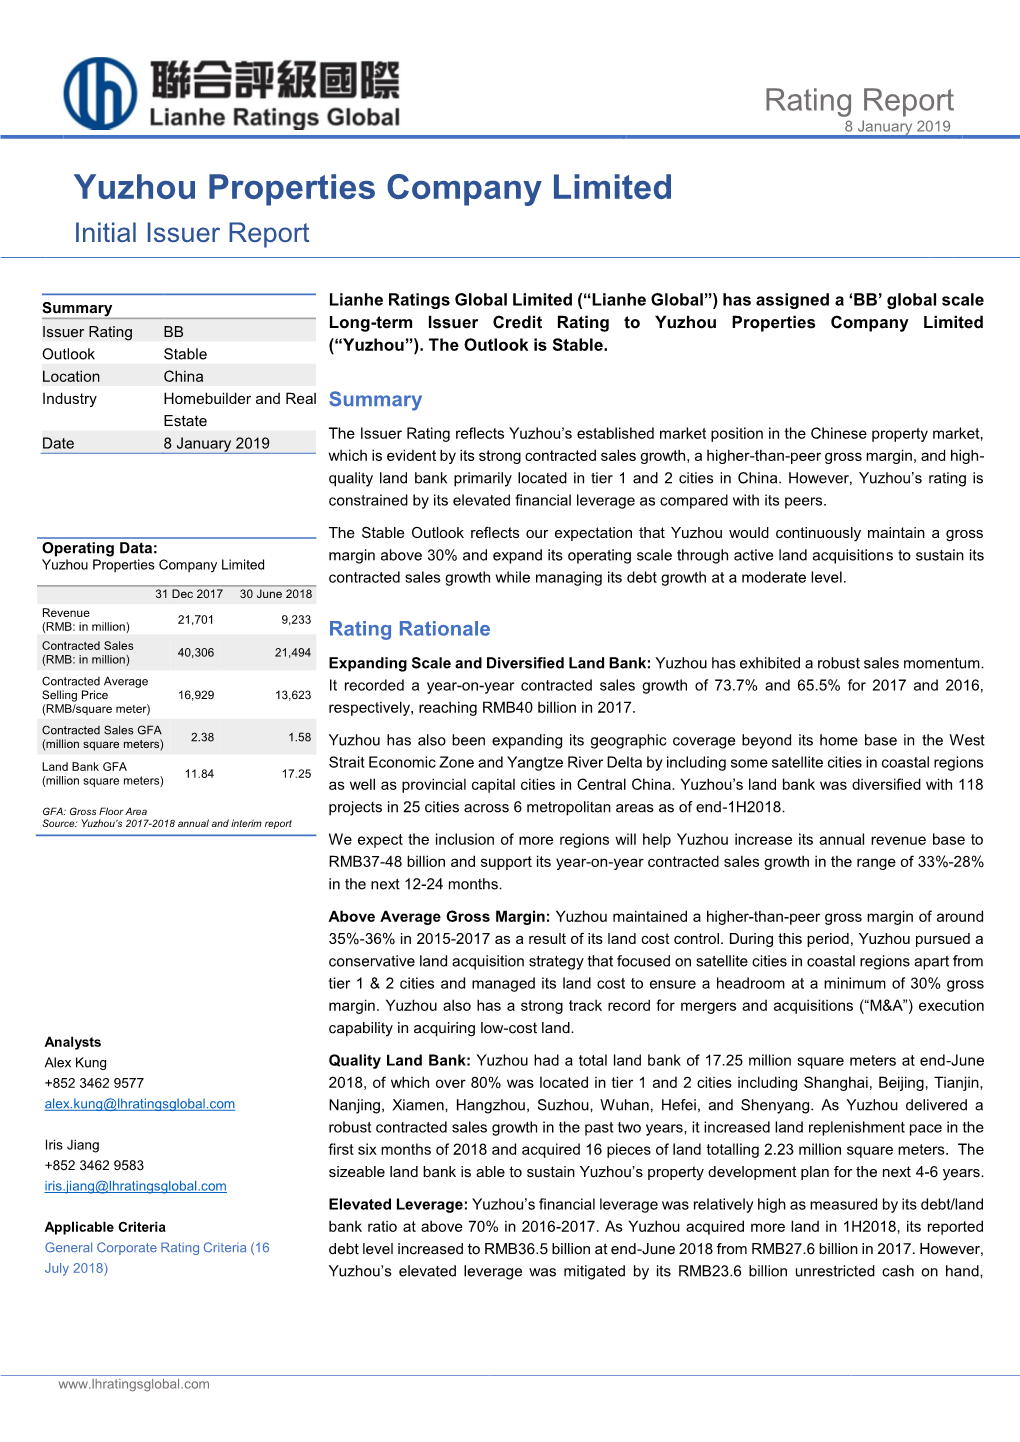 Yuzhou Properties Company Limited Initial Issuer Report